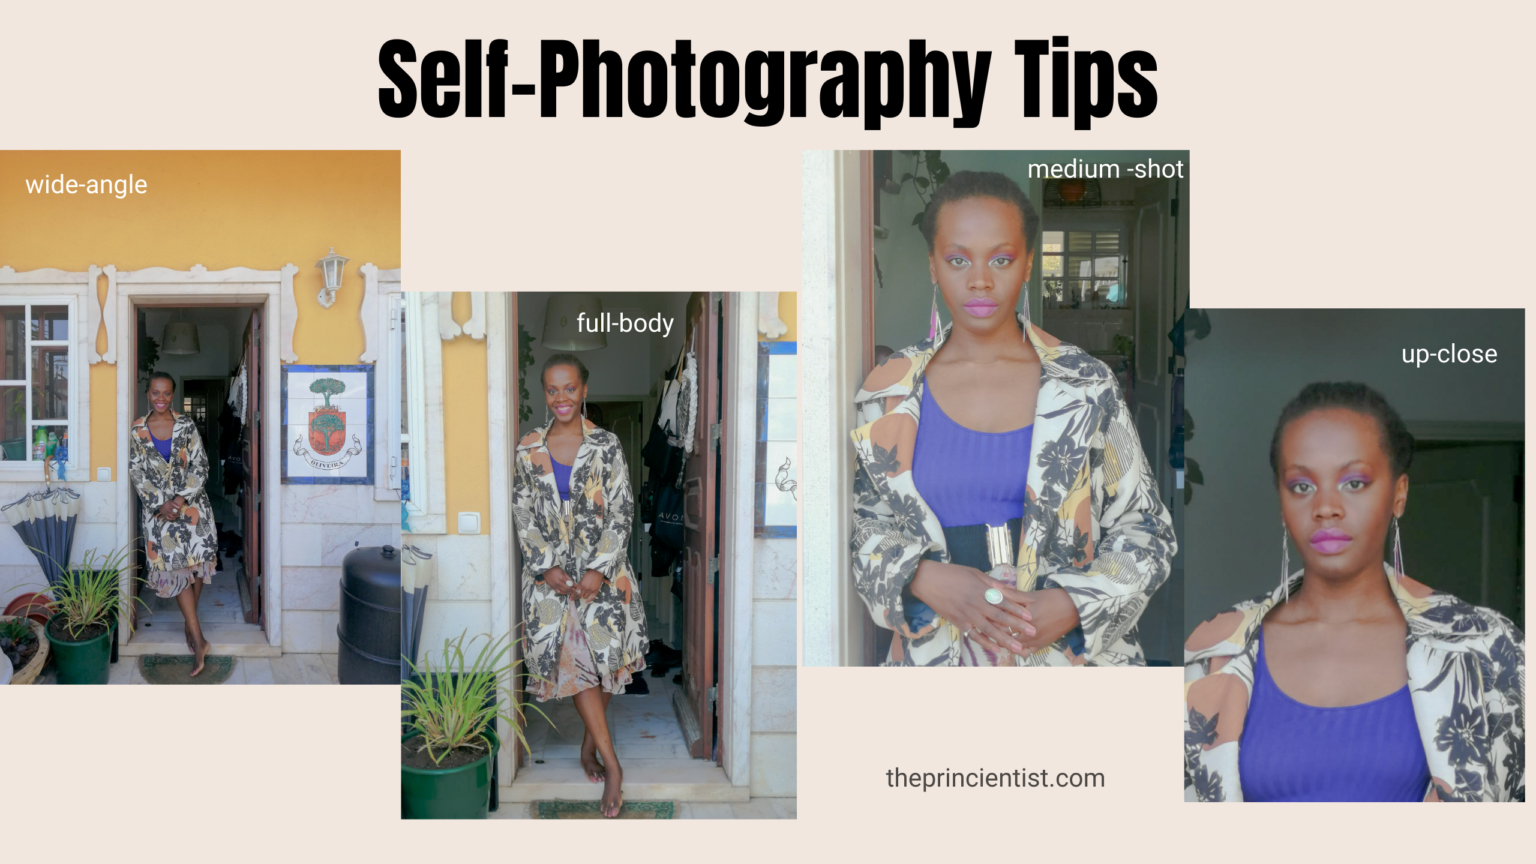 self photography tips - all the photographic photo plans that are possible